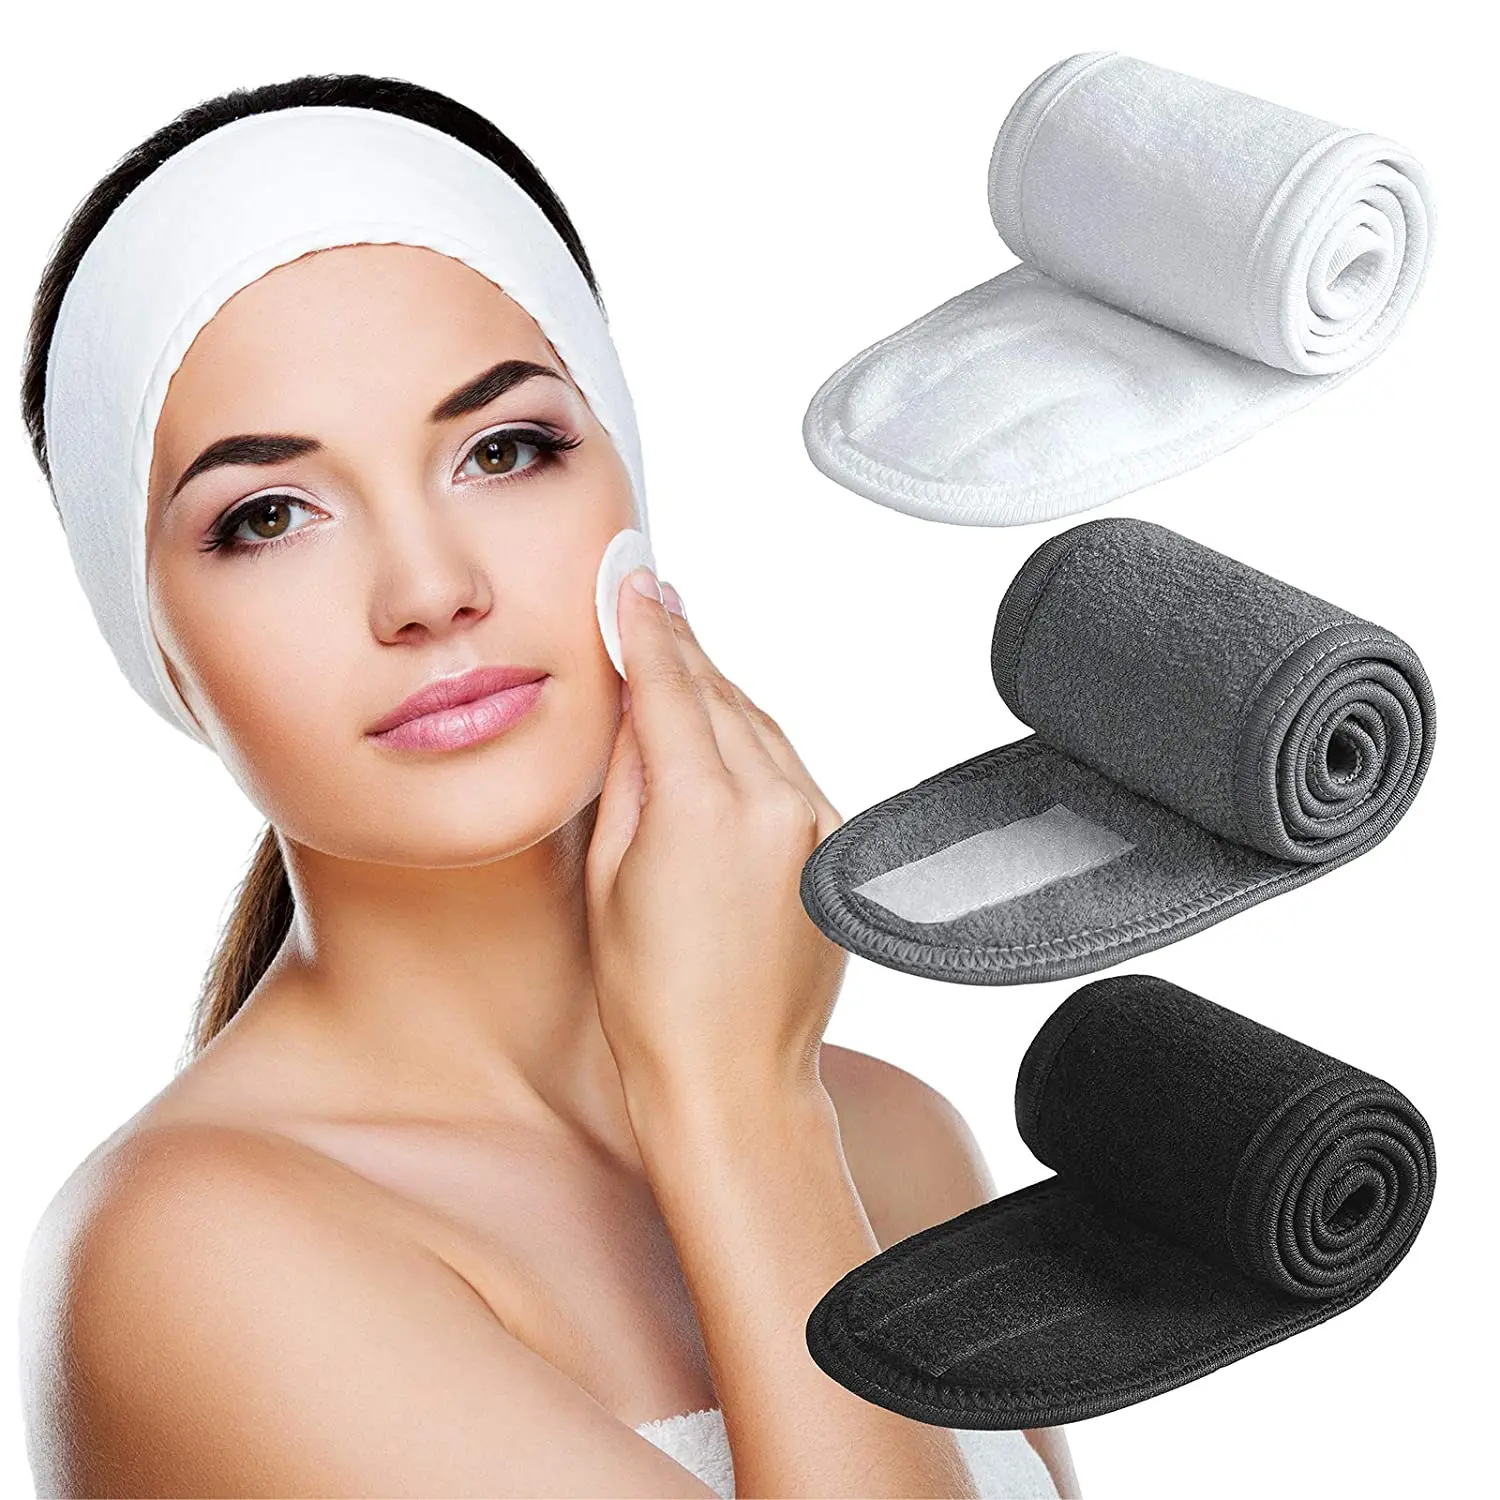 Spa Headband - 3 Pack Ultra Soft Adjustable Face Wash Headband Terry Cloth Stretch Make Up Wrap for Face Washing, Shower, Yoga брюки джоггеры uniqlo ultra stretch airism